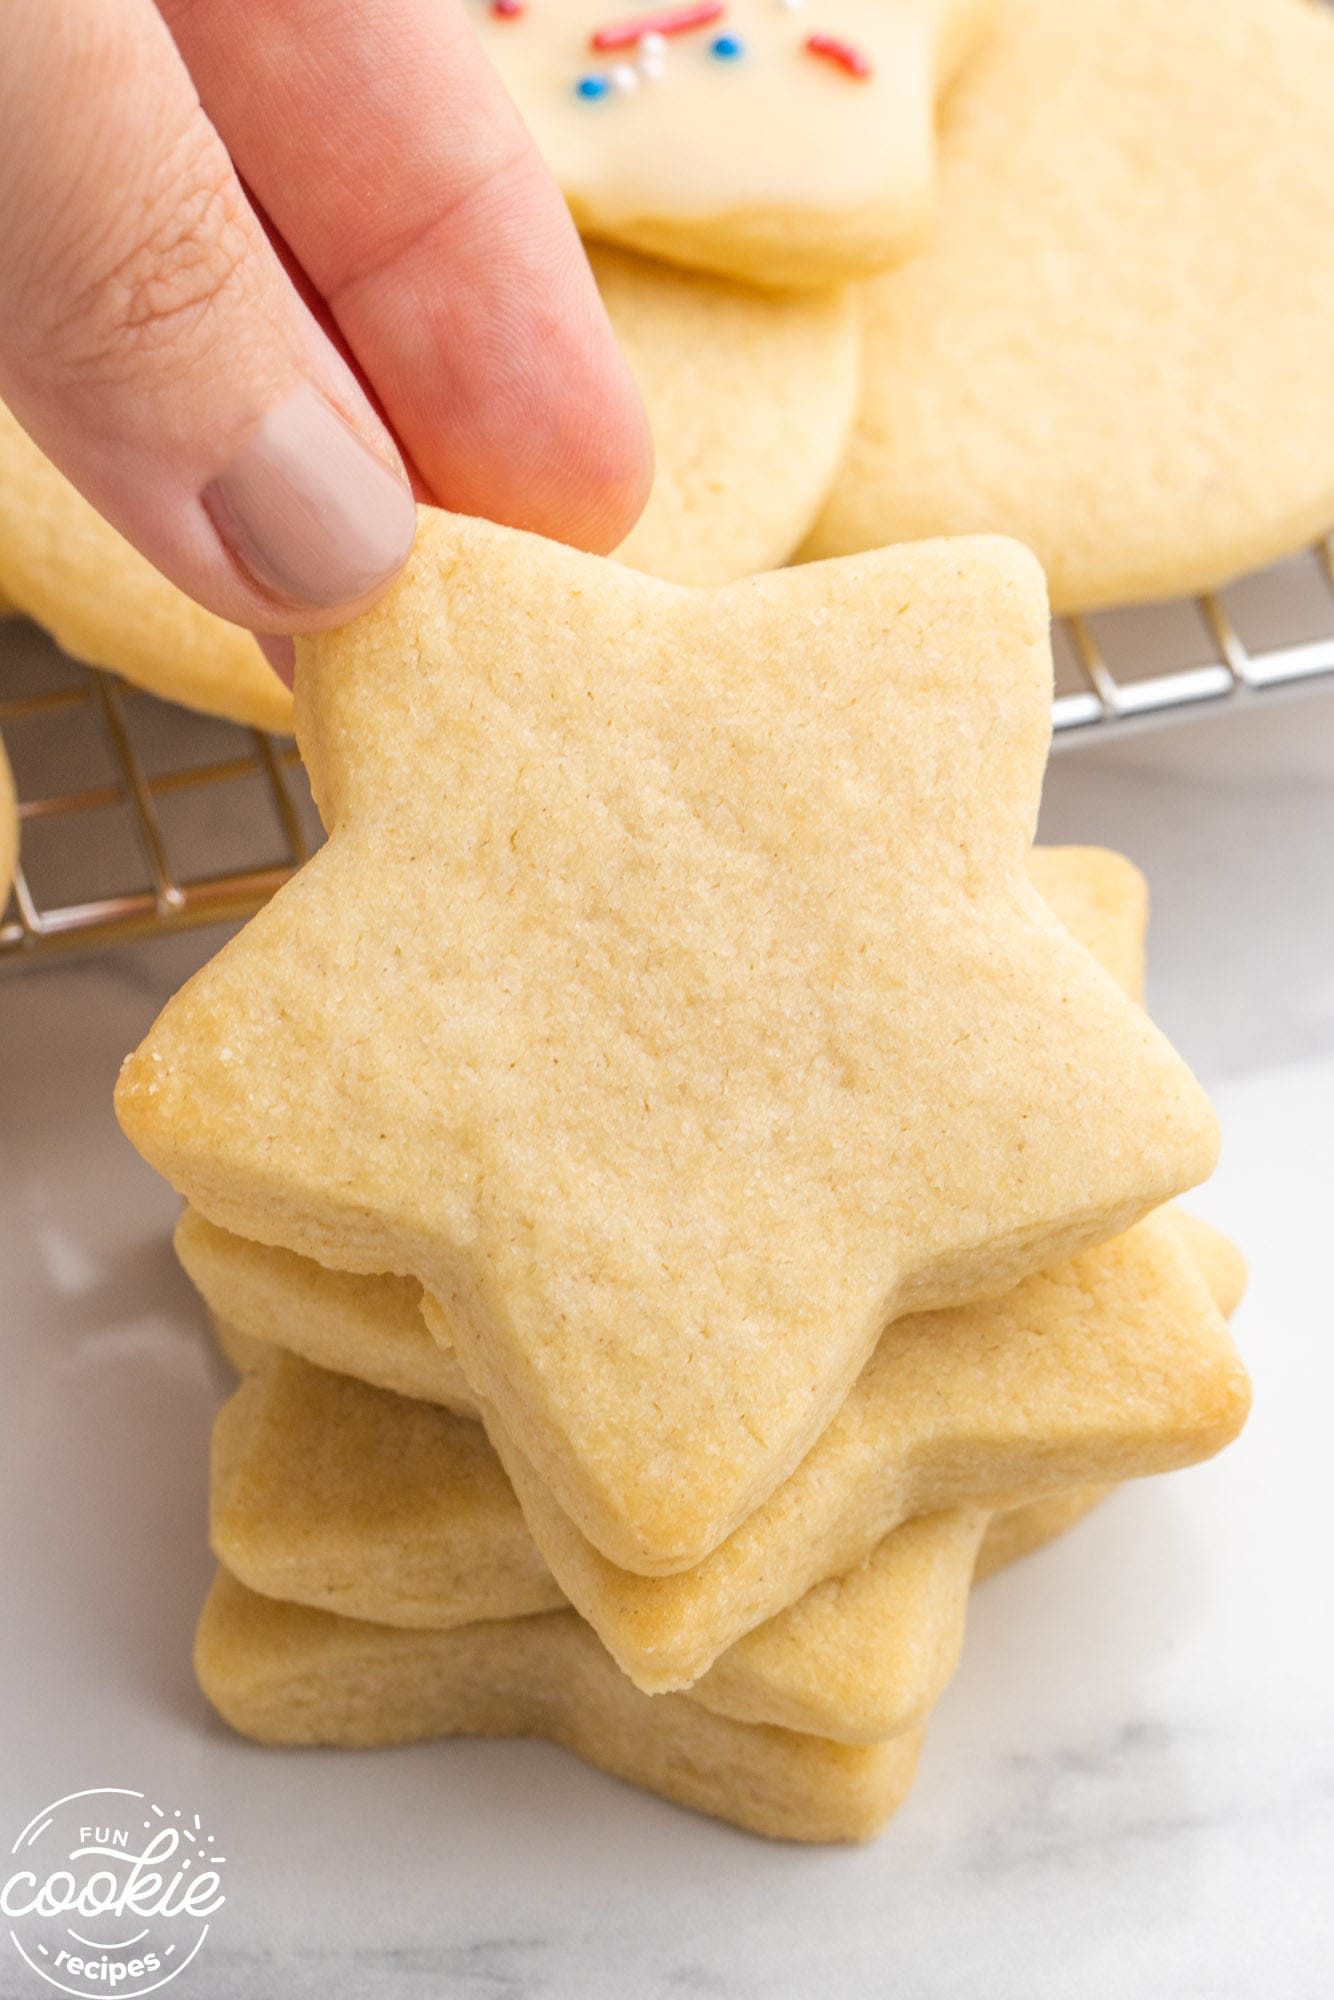 Stacked star sugar cookies, and a hand holding one cookie.